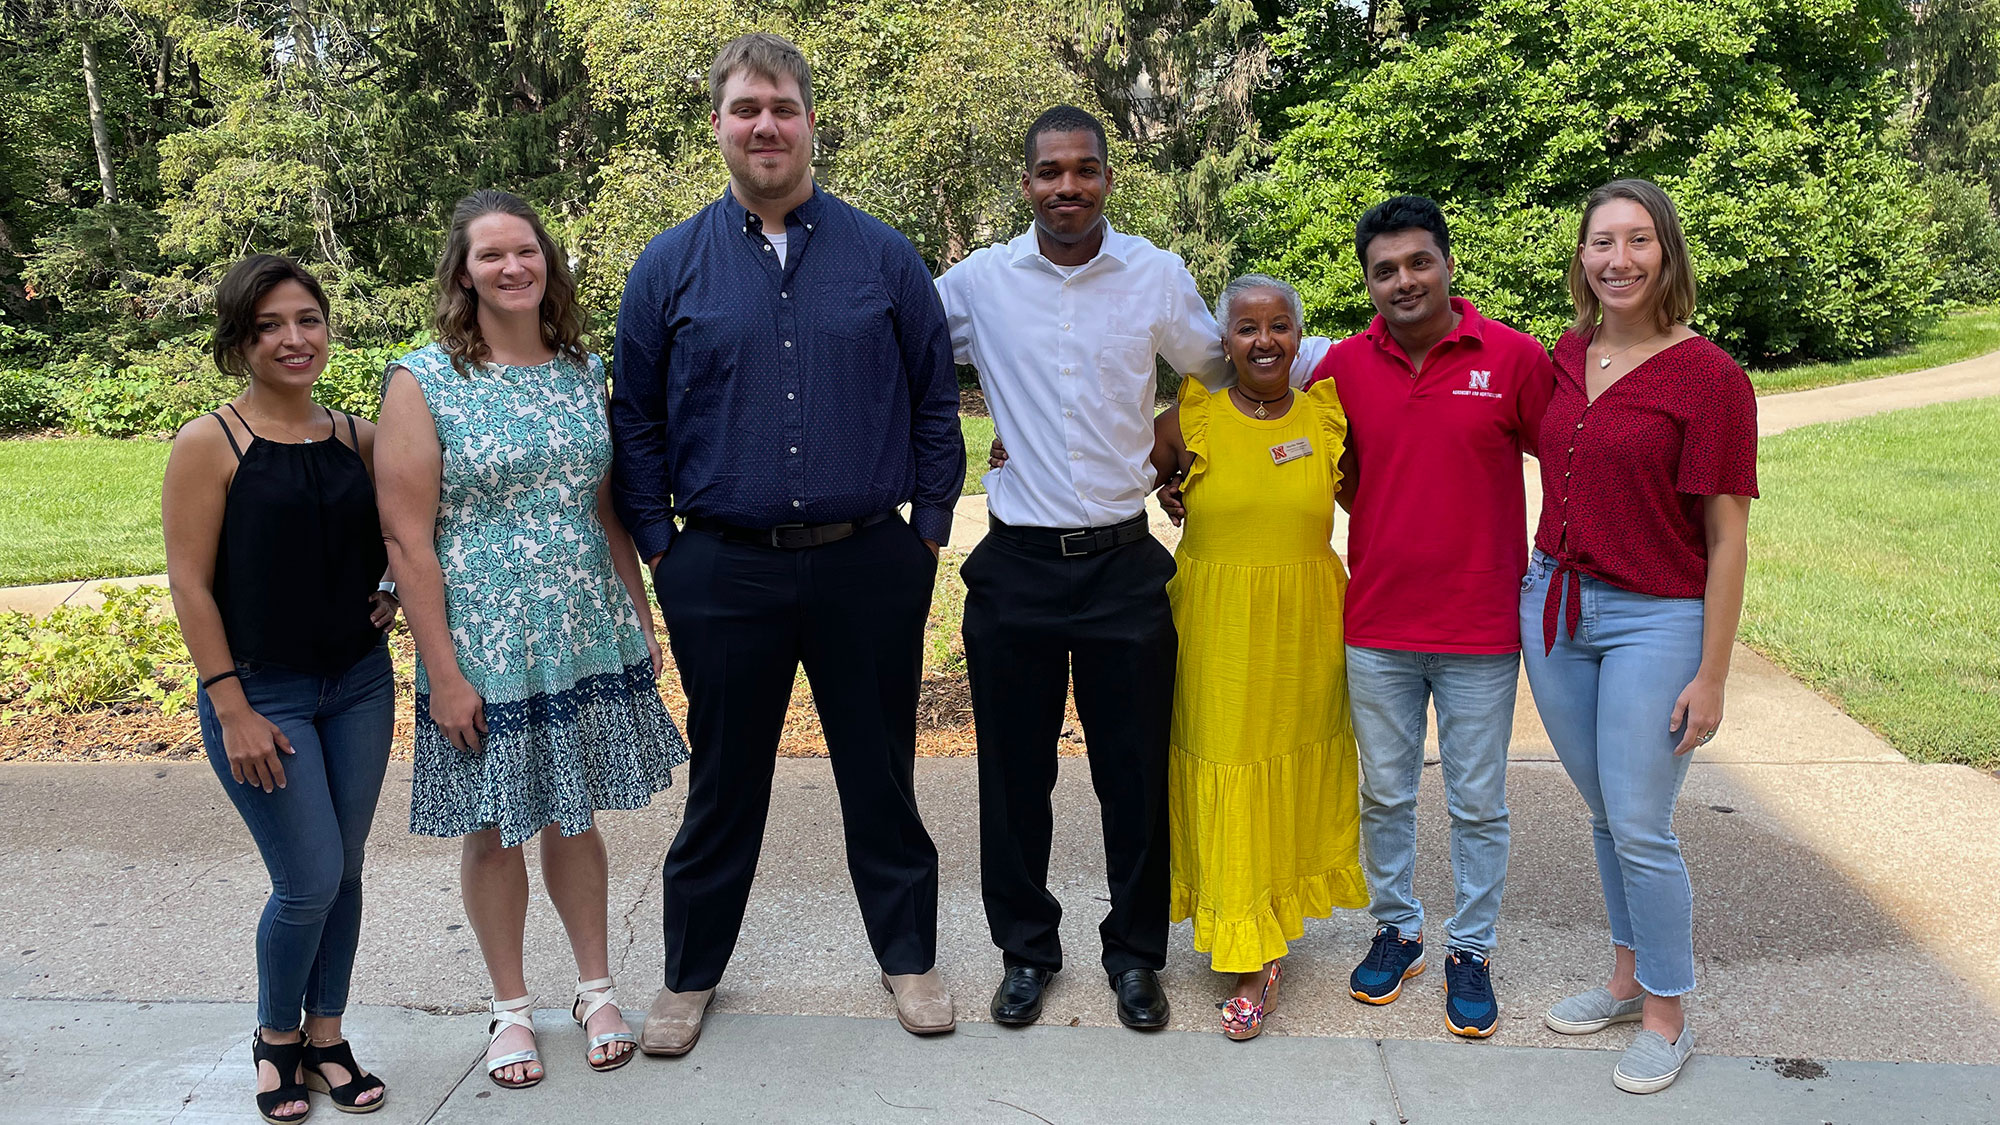  Agronomy and Horticulture Department Head Martha Mamo (third from right) celebrates with Elnazsadat Hosseinighdam (from left), Lindsey Overmyer, Shawn McDonald, Kailon Lang, Dinesh Panday and Jasmine Mausbach at the department graduation reception Aug. 13.